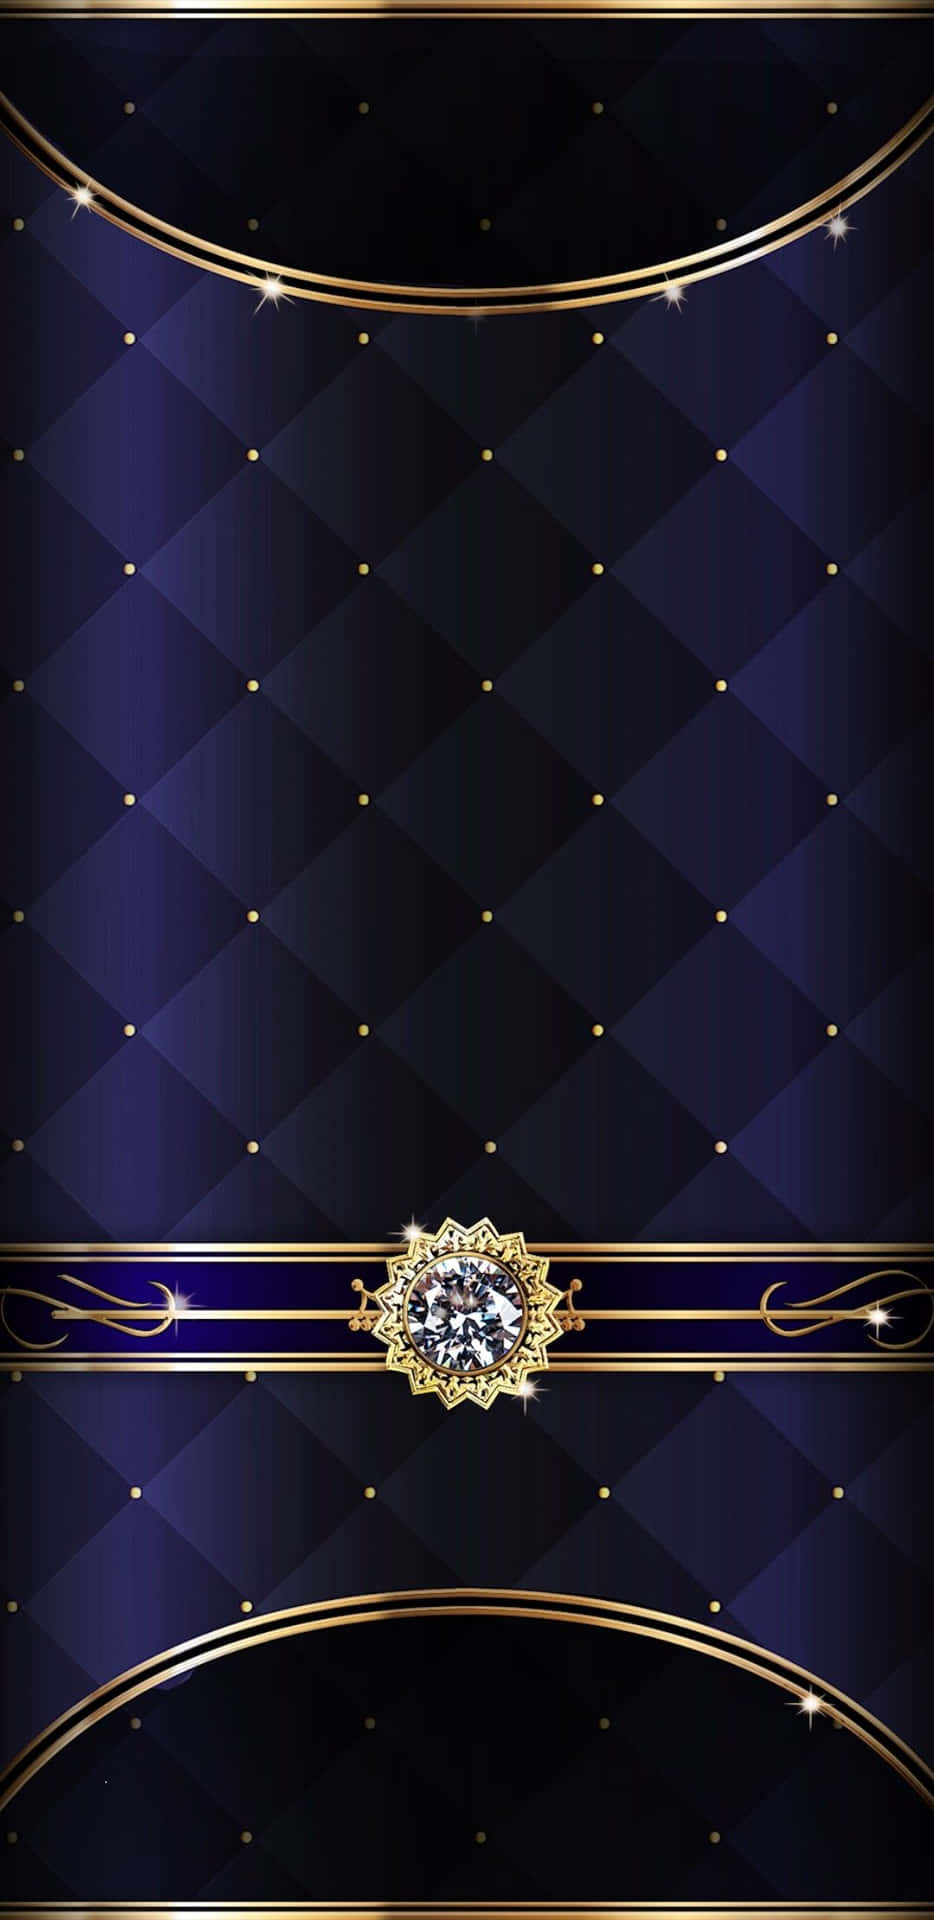 Tufted Blue Gold Expensive Background